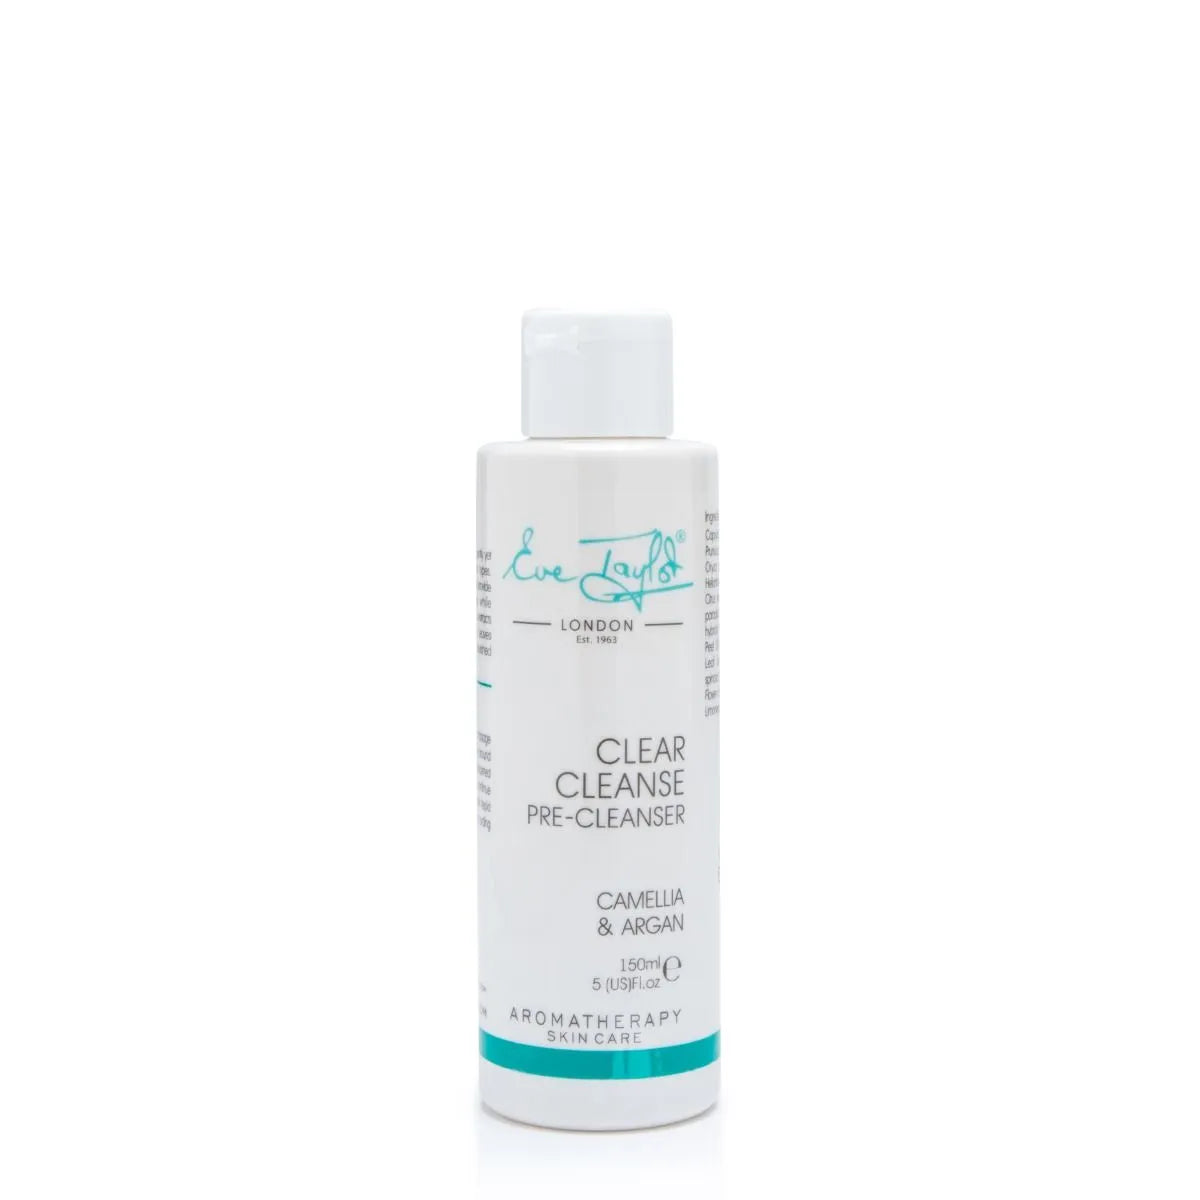 Clear cleanse Pre-cleanser